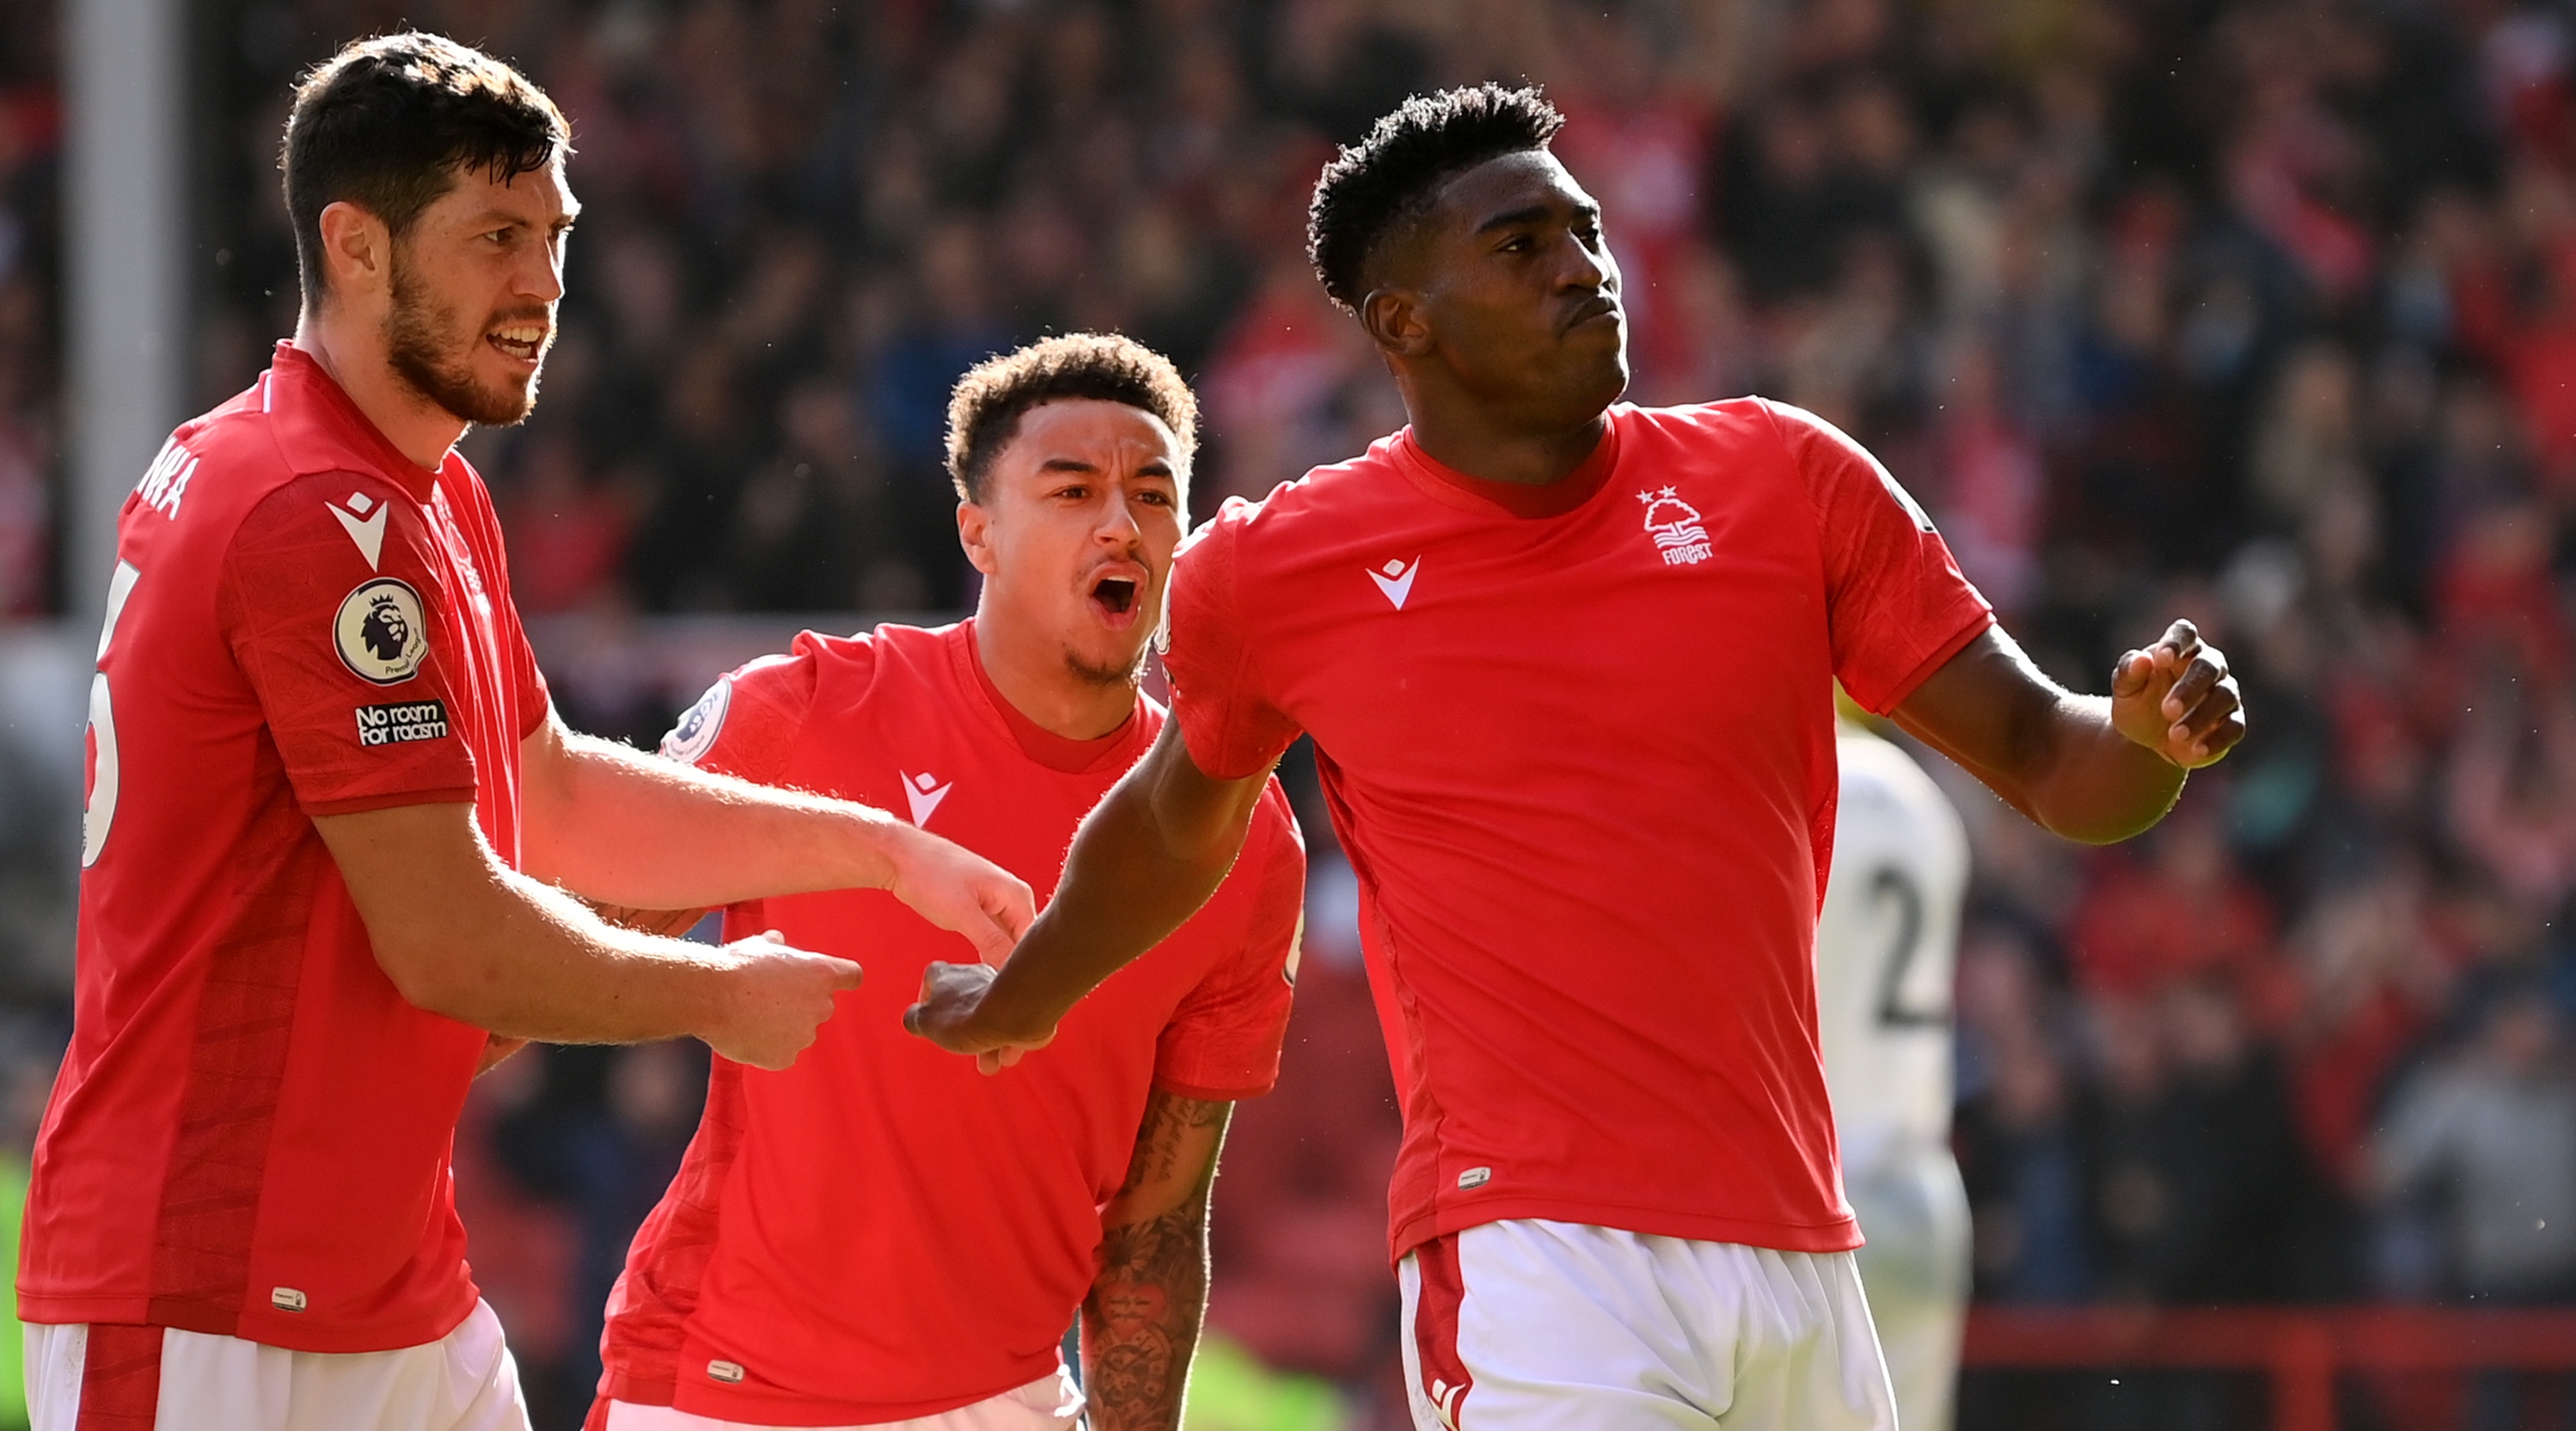 Nottingham Forest striker Taiwo Awoniyi celebrates with his teammates after scoring his team's goal during the Premier League match between Nottingham Forest and Liverpool on 22 October, 2022 at the City Ground, Nottingham, United Kingdom